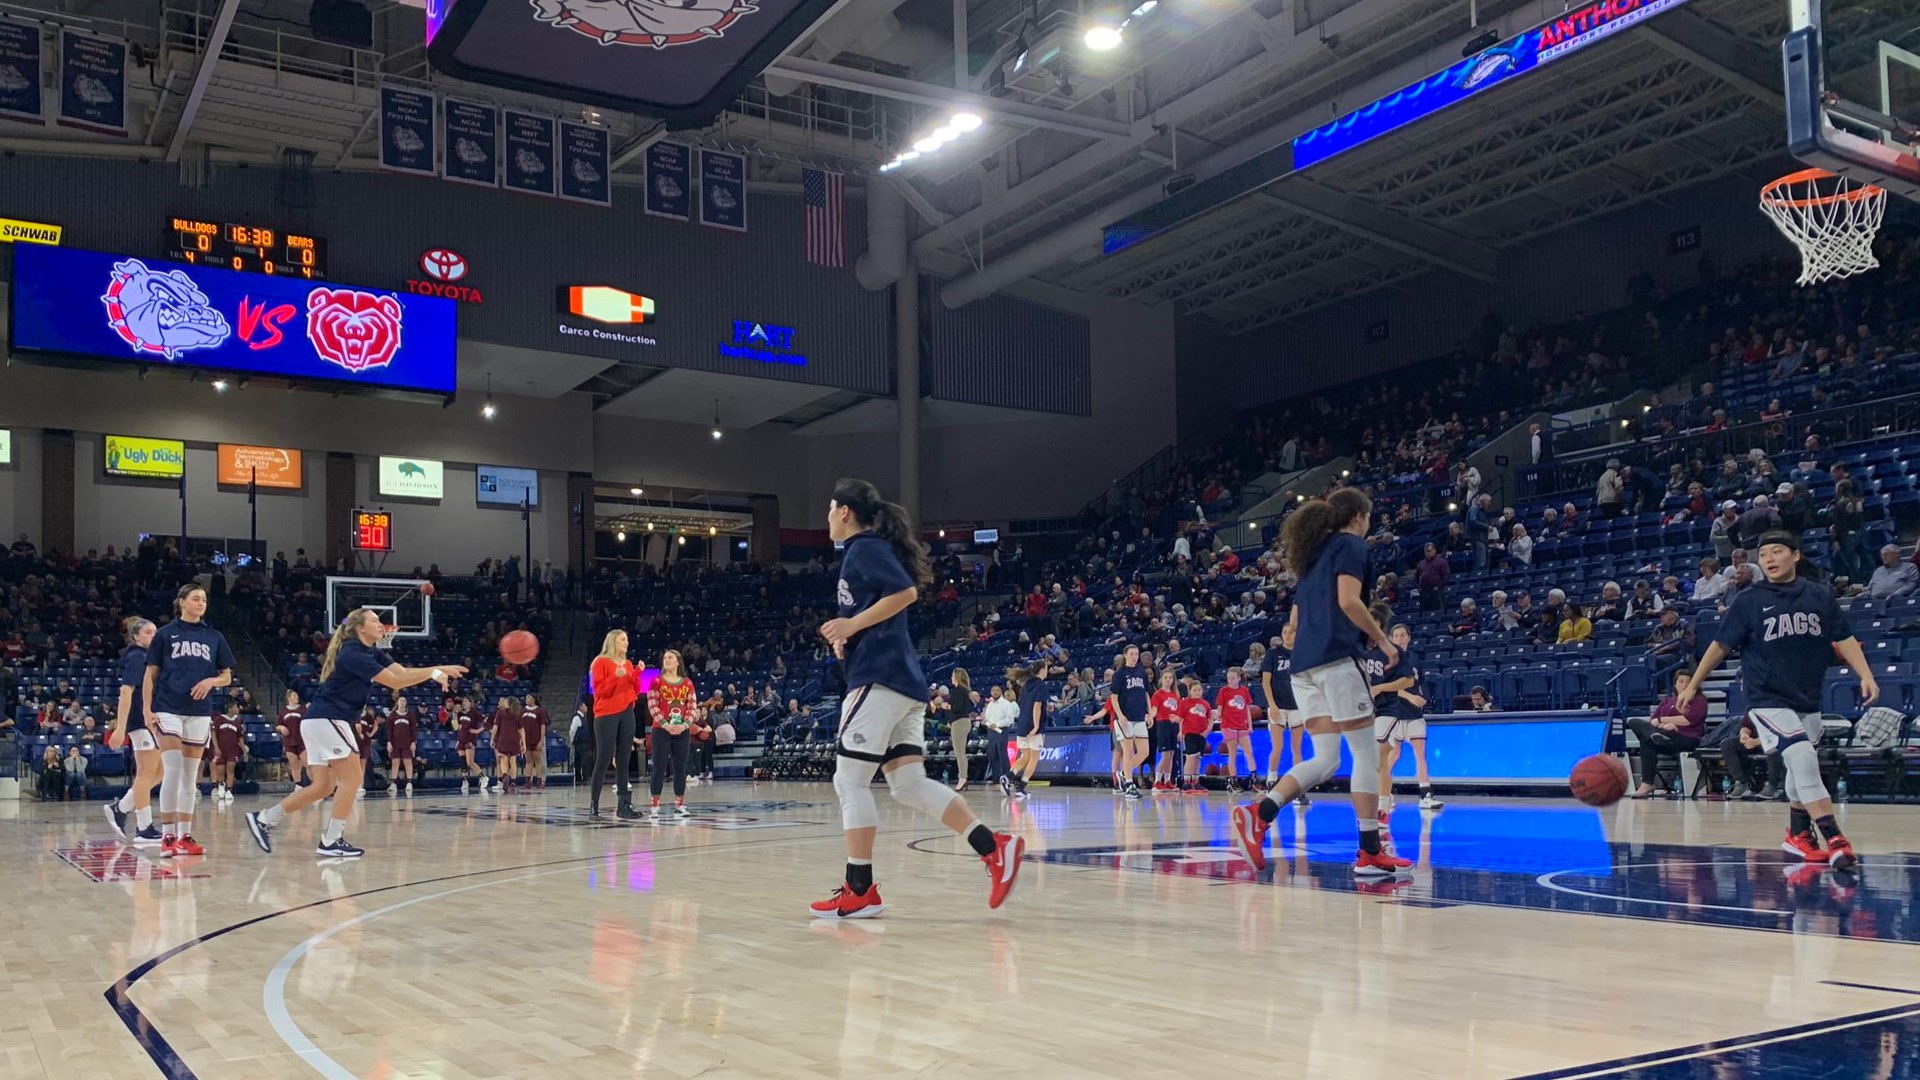 The Gonzaga women wrap up their non-conference schedule at 11-1.